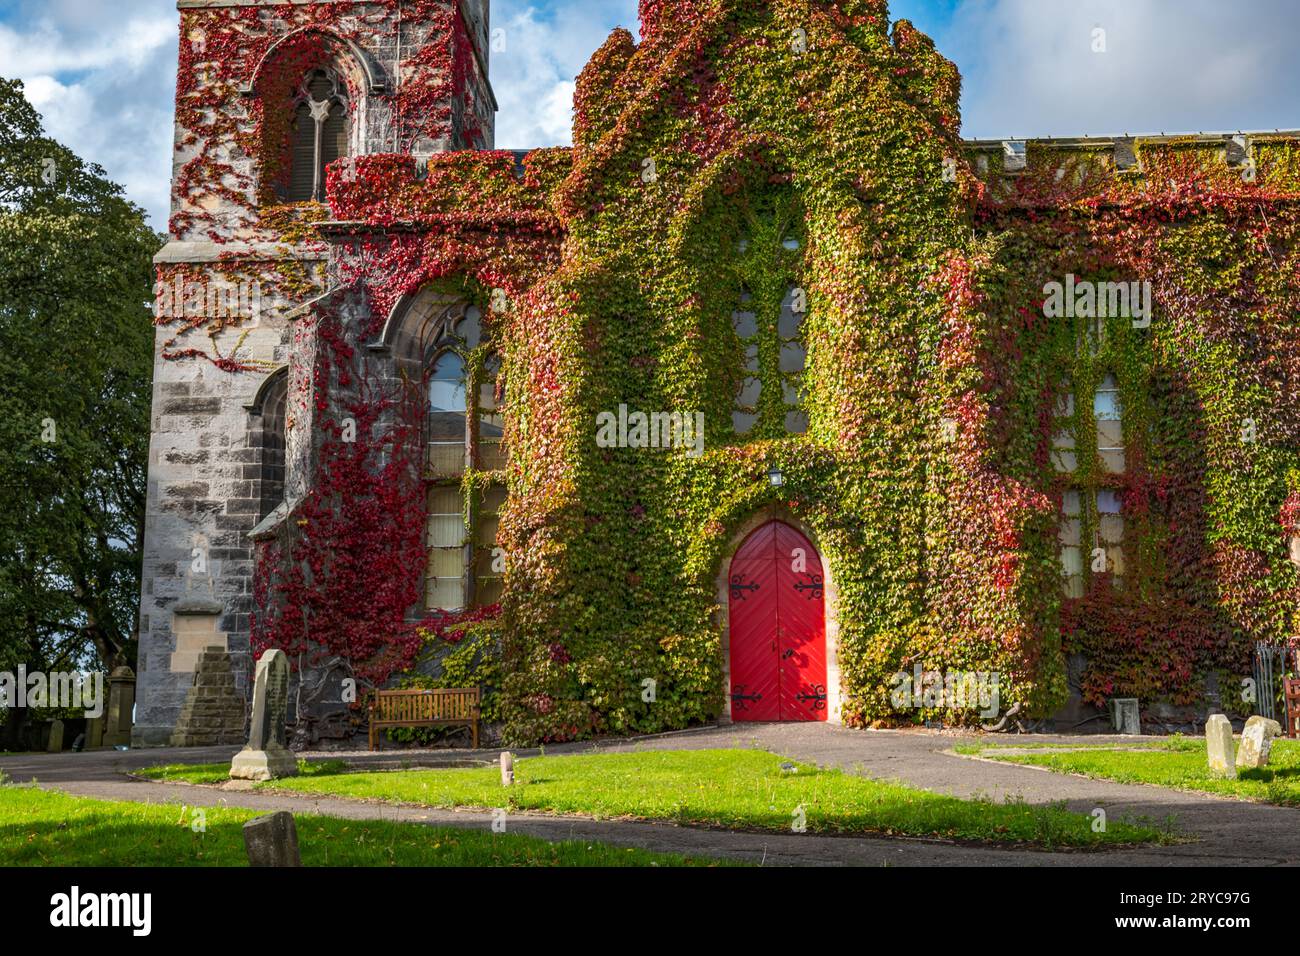 Autumn red ivy growing on wall of Liberton Kirk or Church with red door and graveyard, Edinburgh, Scotland, UK Stock Photo